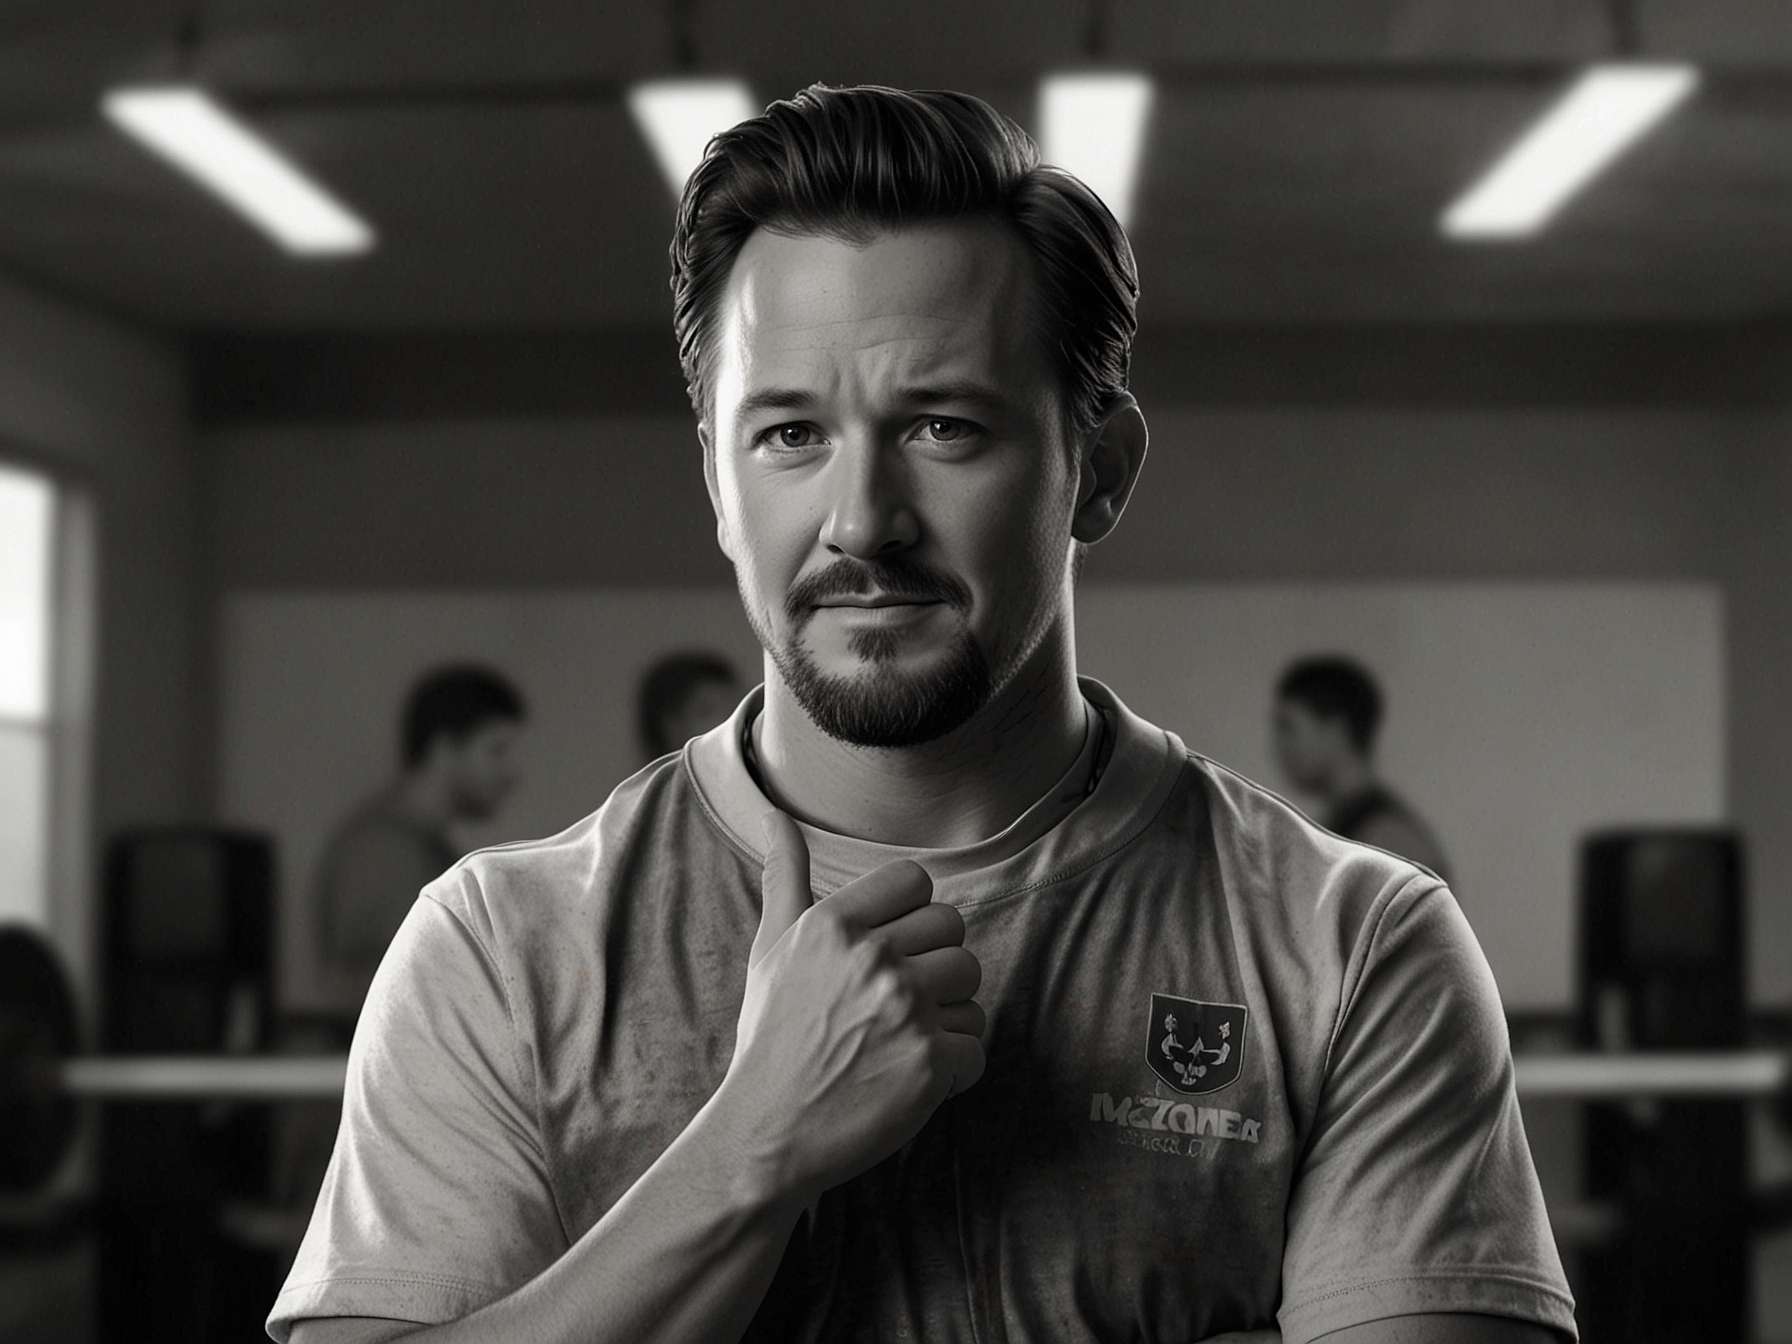 Chandler addresses his fans directly through a video, his face showing gratitude and confidence. Behind him, a training space symbolizes his commitment to stay fight-ready despite setbacks.